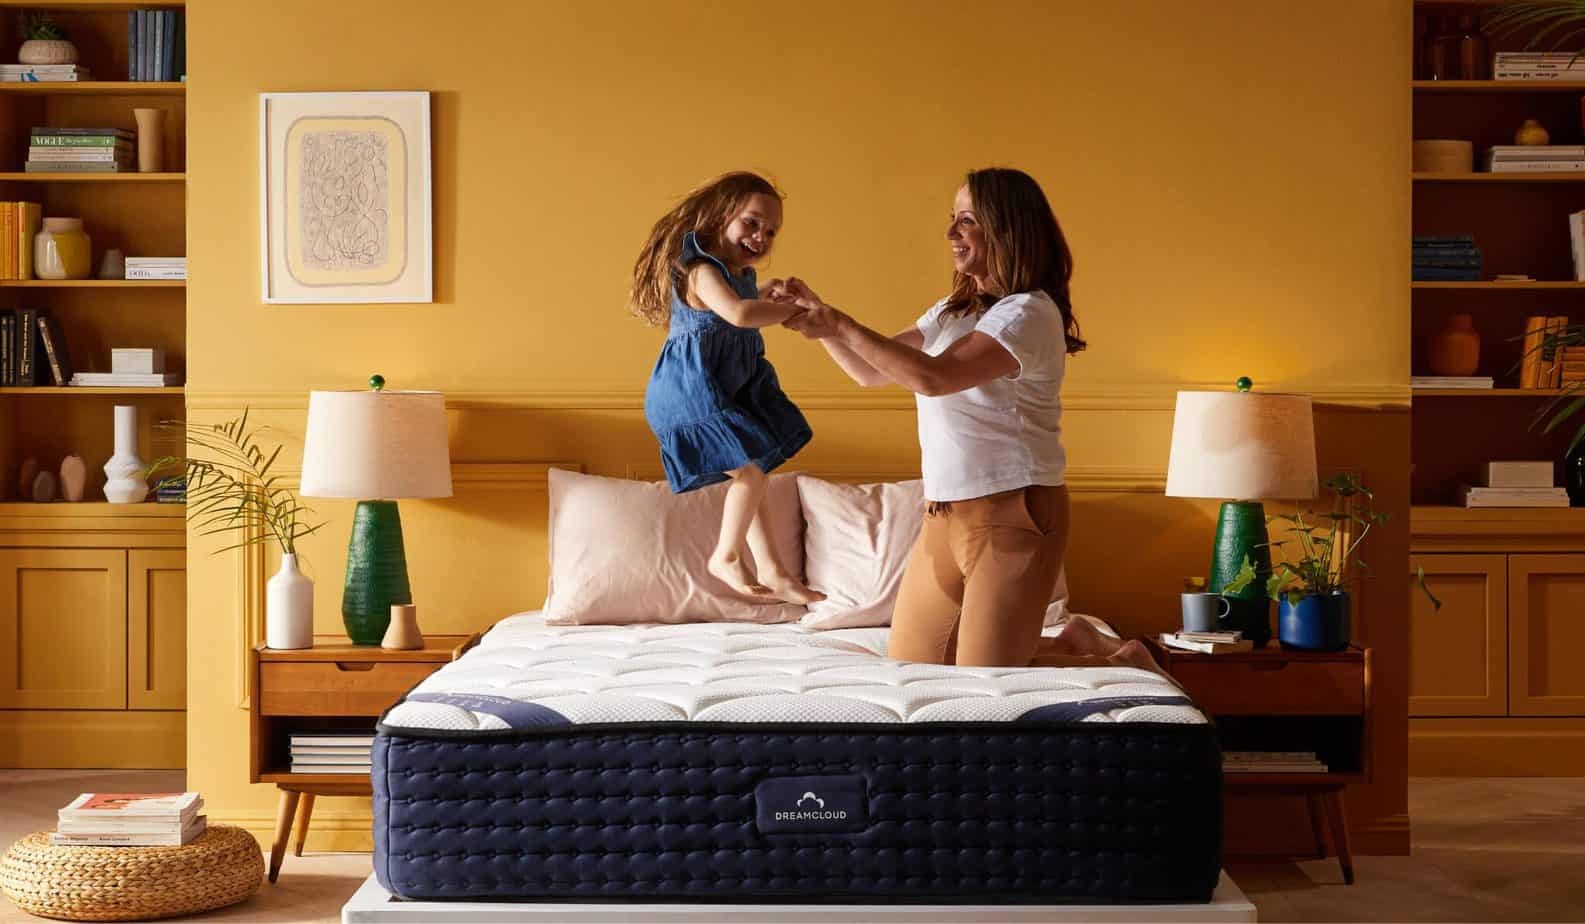 A child jumps on top of a bare dreamcloud mattress in a yellow room, while holding her mom's hands.